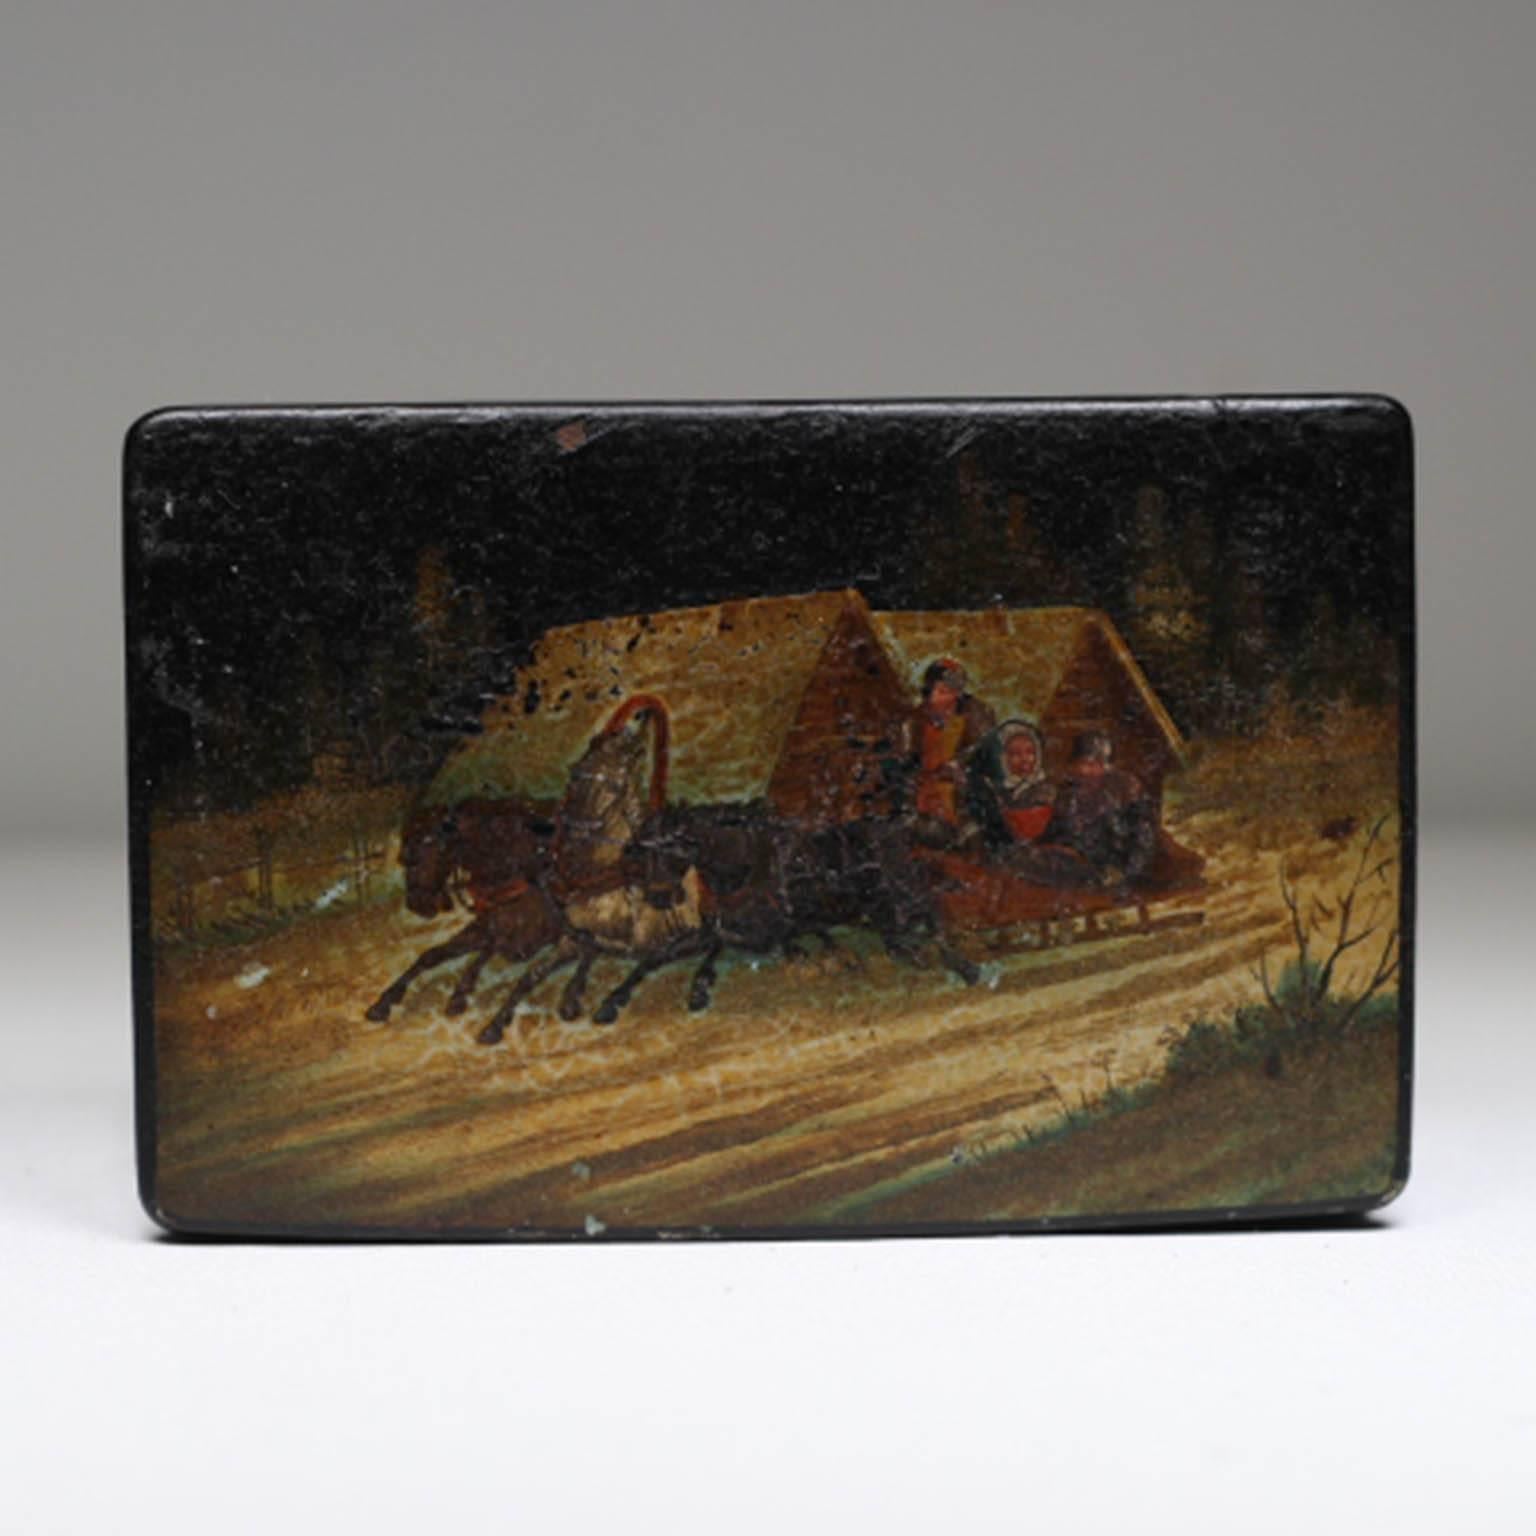 Hand-painted Russian tea or tobacco box with red lacquered interior.